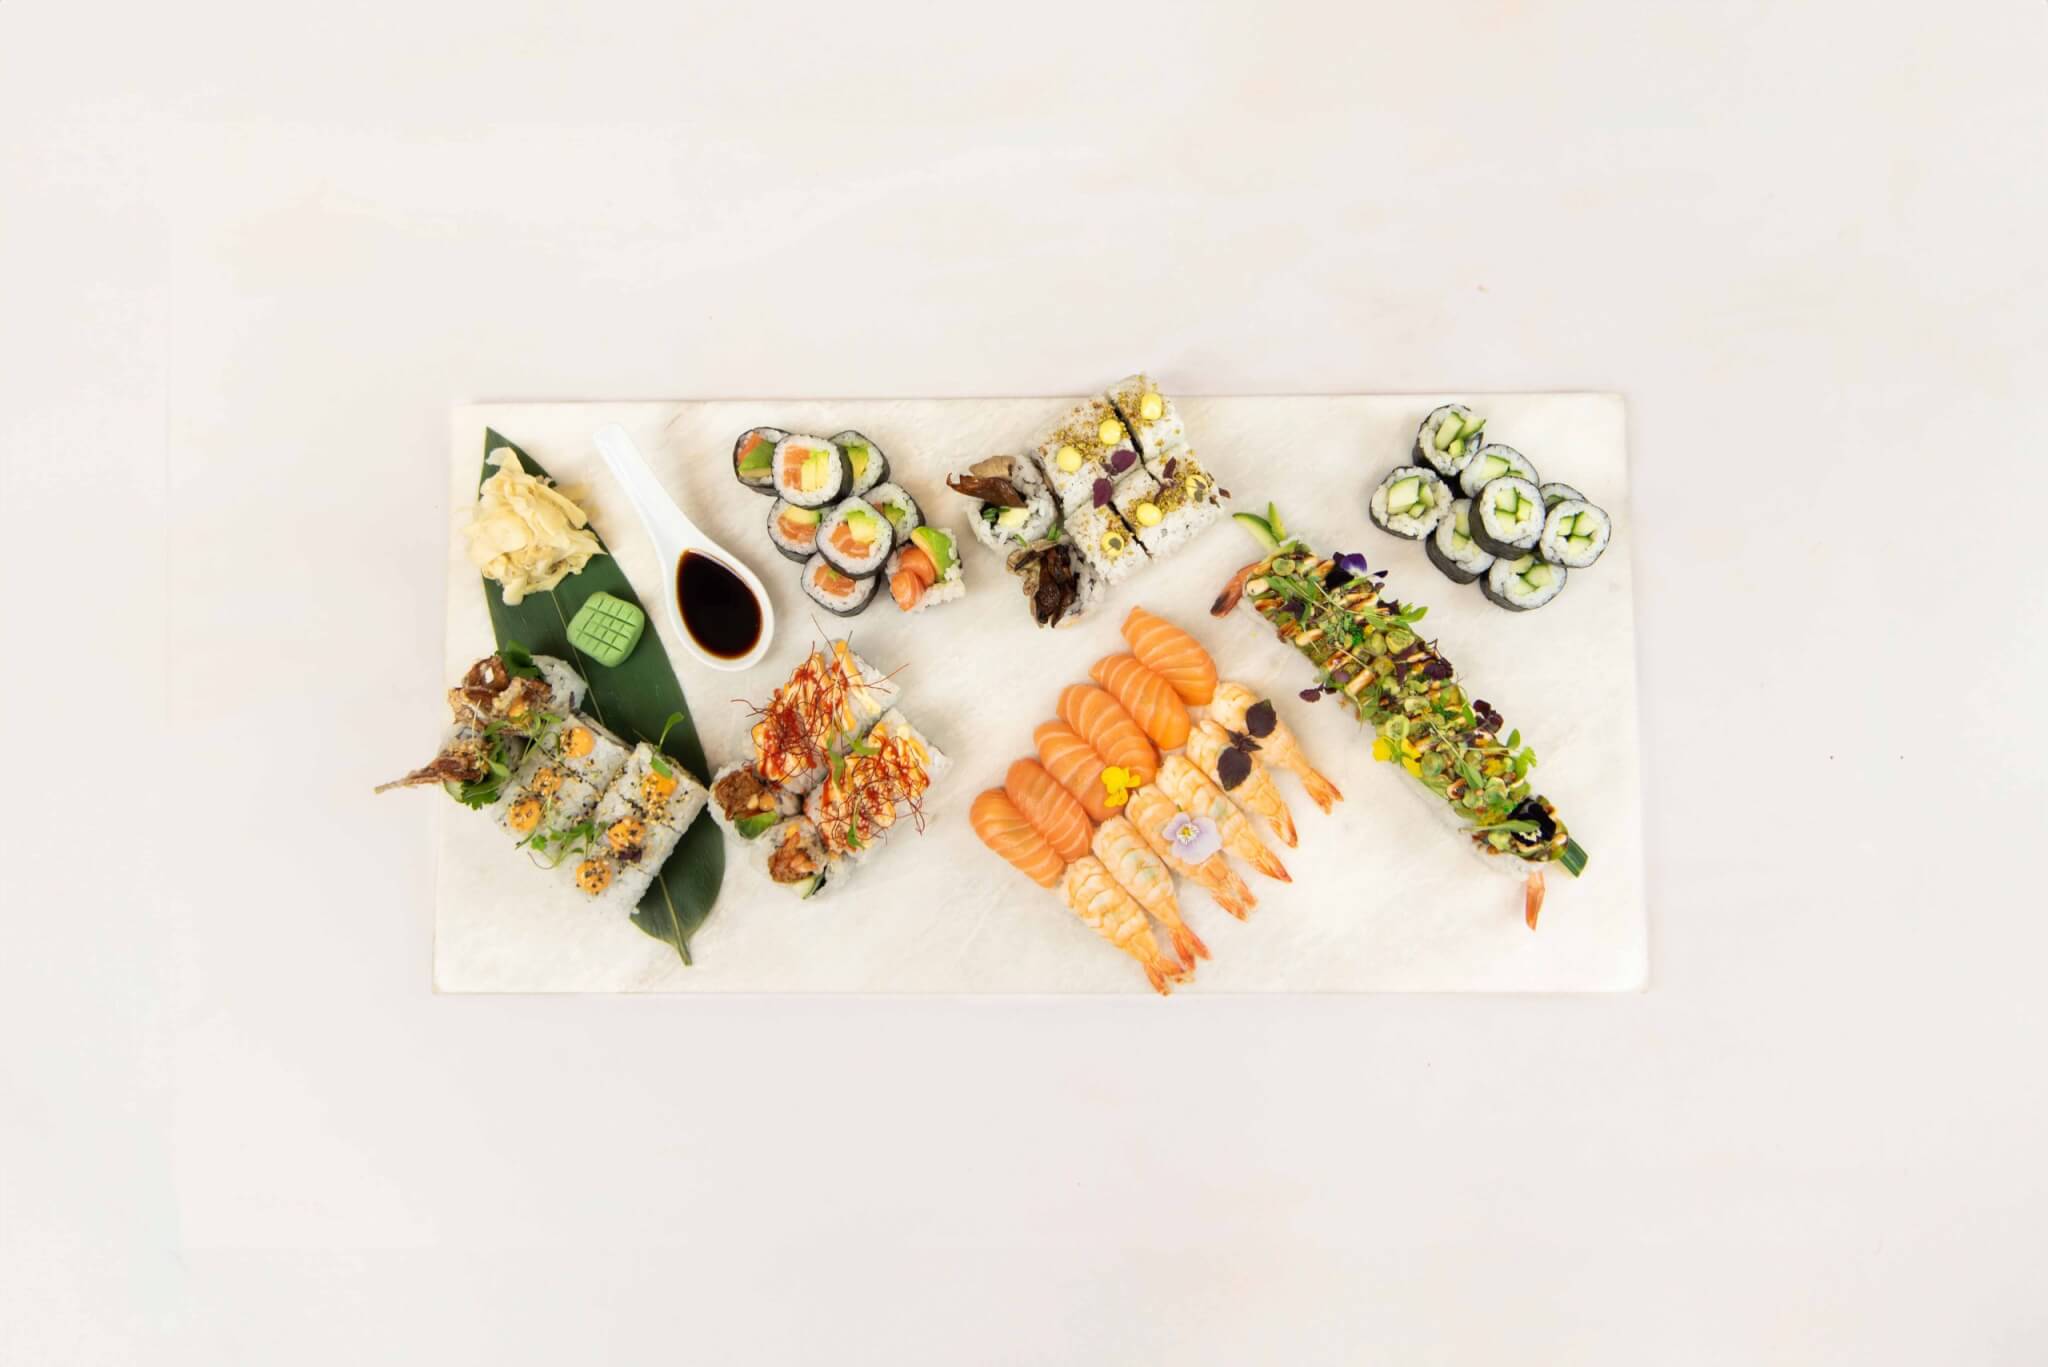 Buy Sushi Kit Online at the Best Price, Free UK Delivery - Bradley's Fish